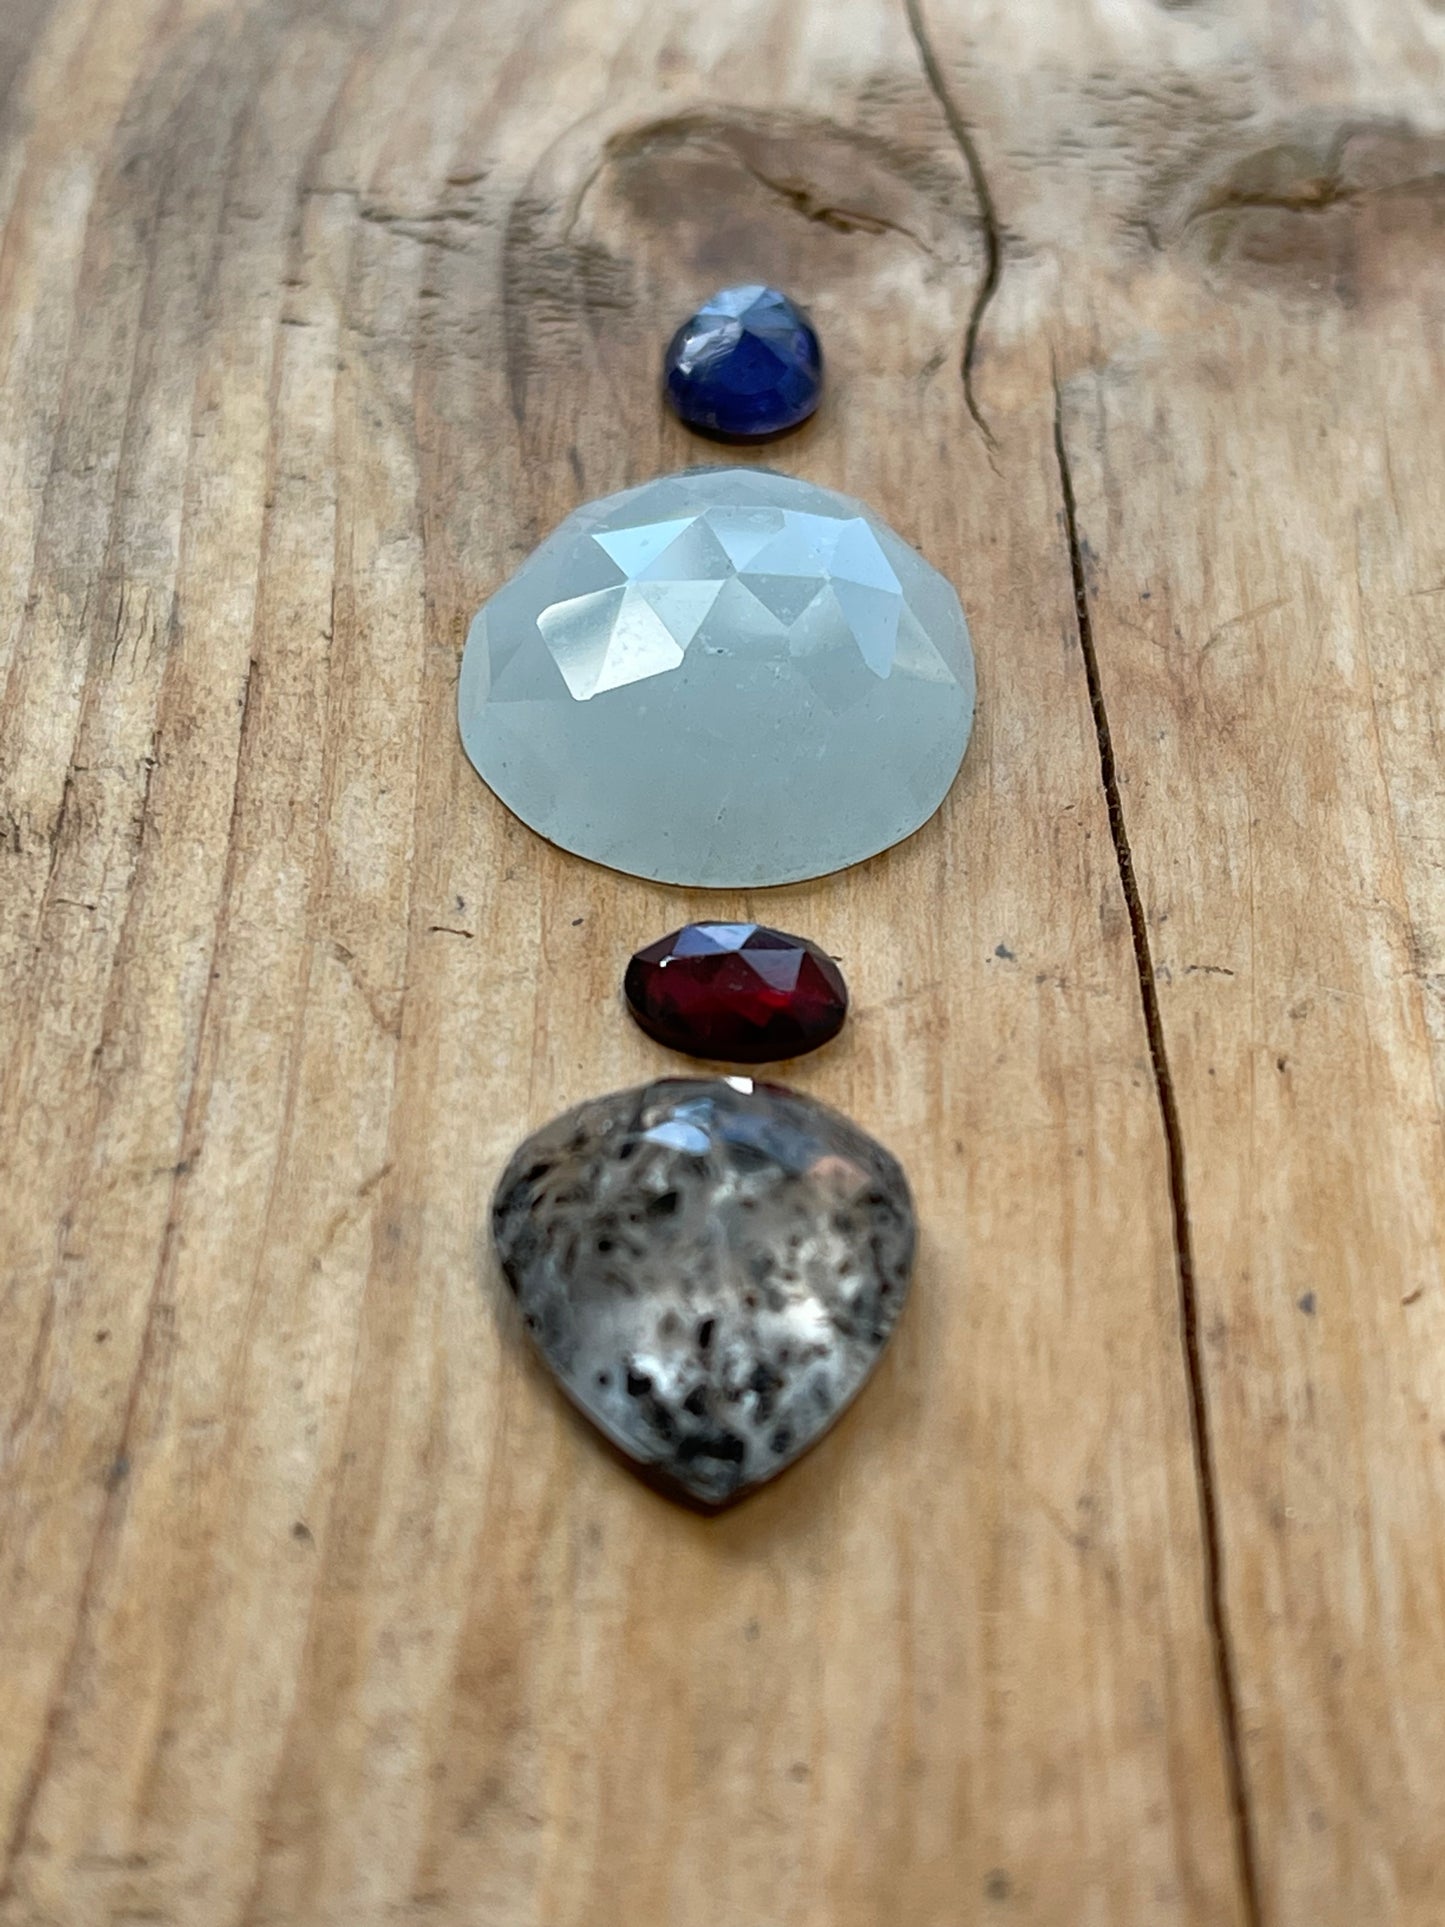 Gemstone Collection 628: CLEAR SPECKLED AGATE, KYANITE, CHALCEDONY, RAINBOW TOURMALINE - 28CT